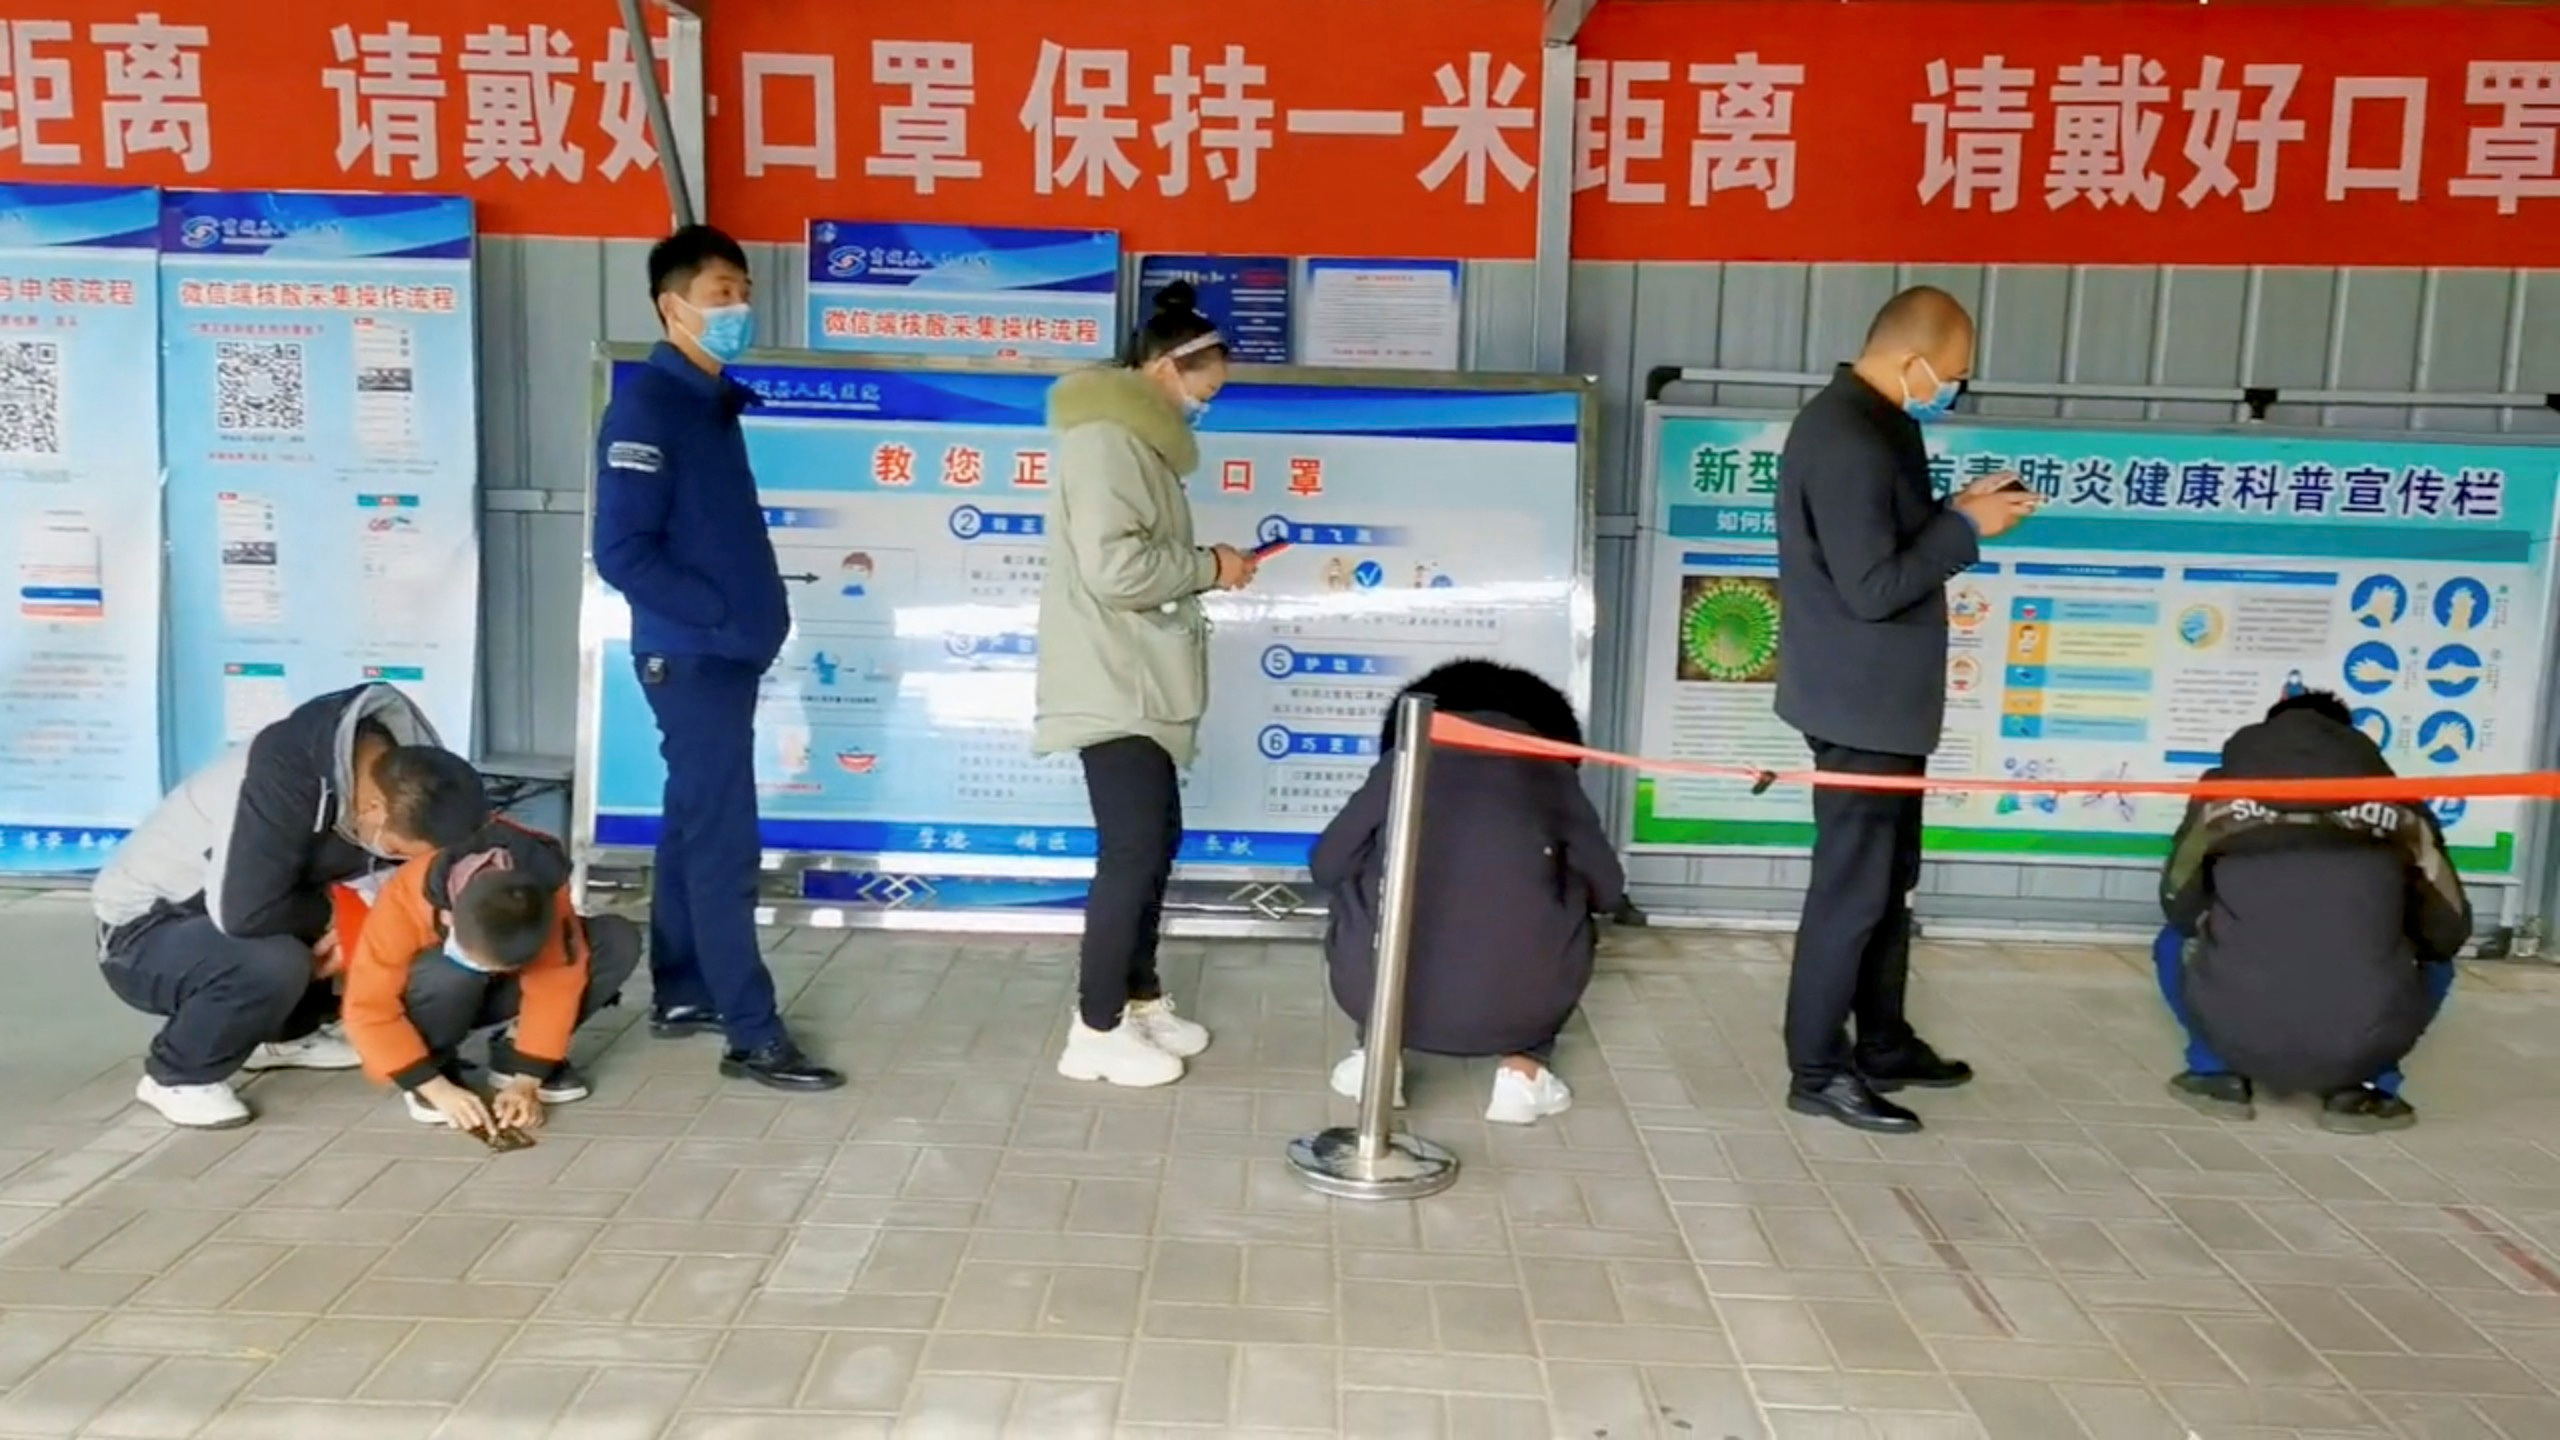 People wait in line at a coronavirus disease (COVID-19) test centre in Xinyang